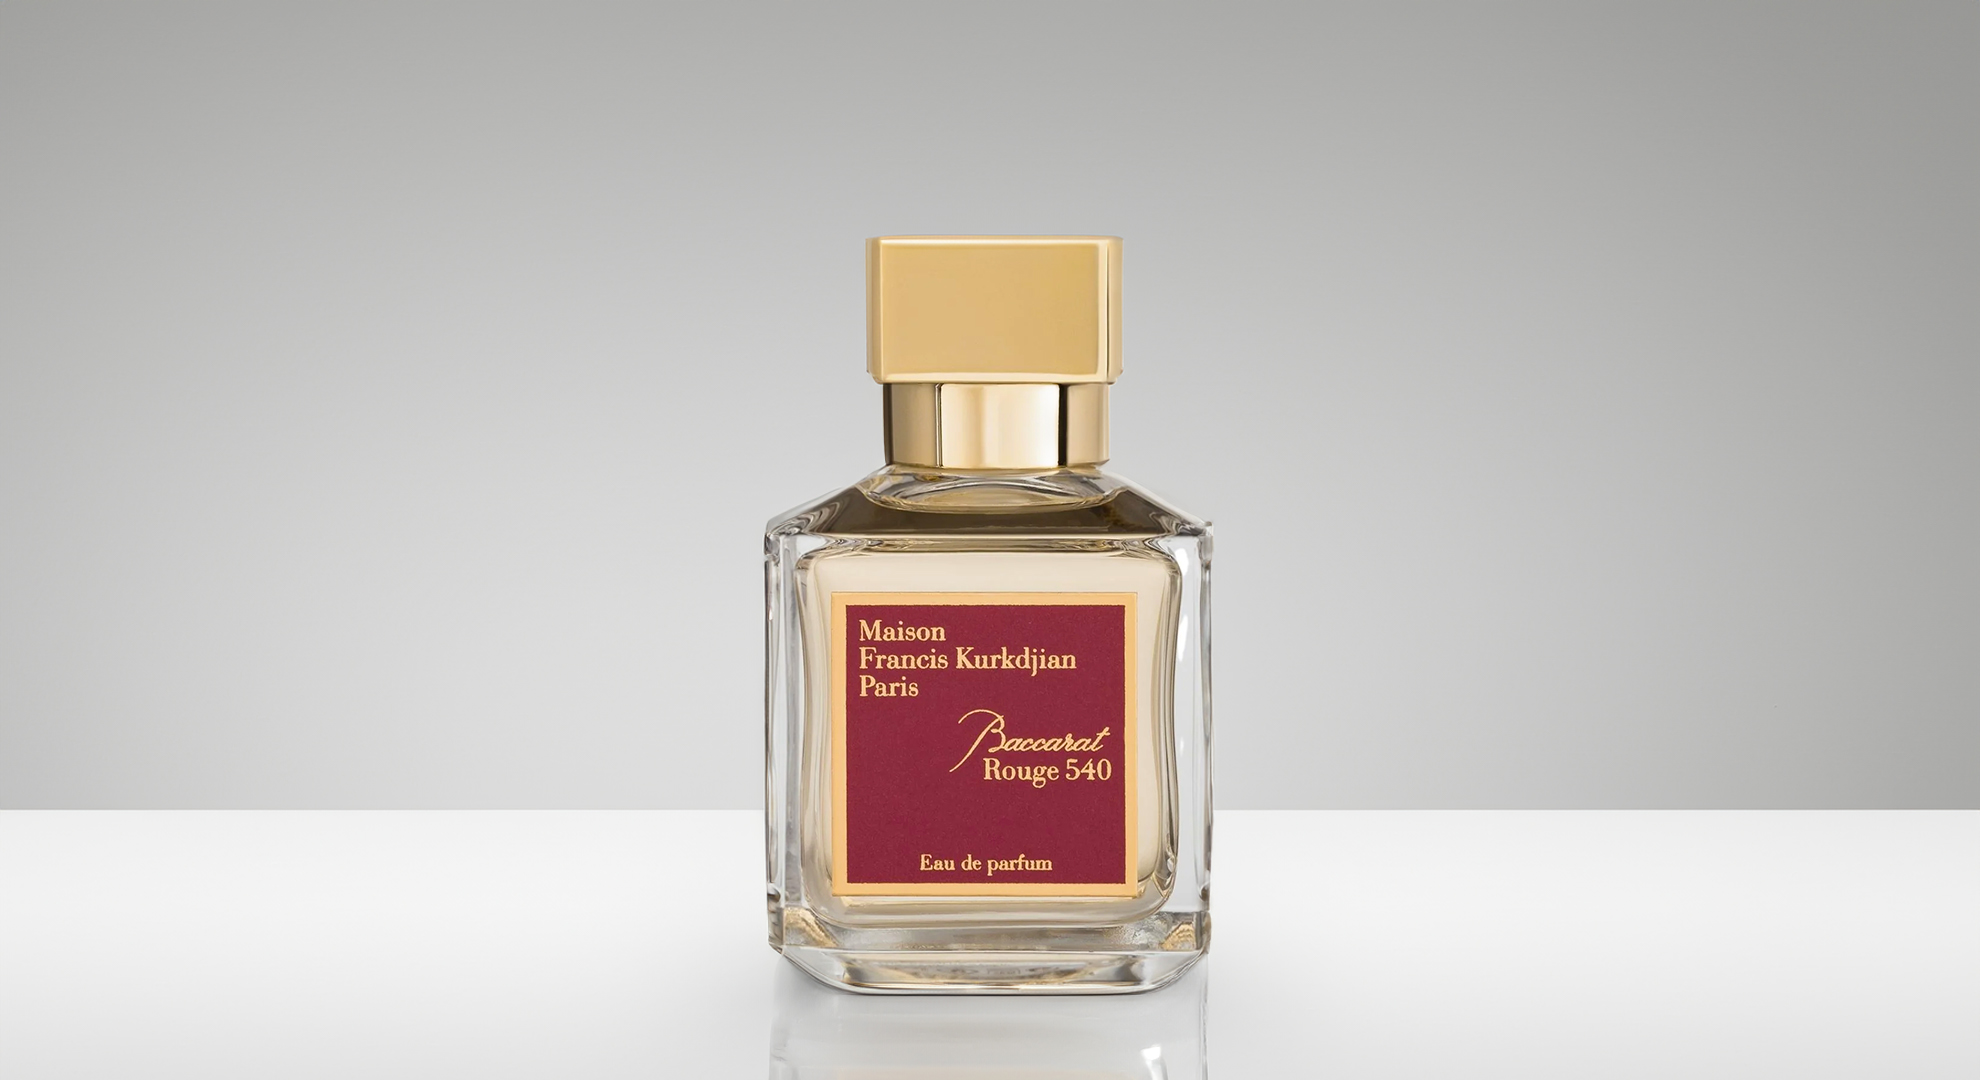 The Alchemy of Scent: Baccarat Rouge 540 by Maison Francis Kurkdjian